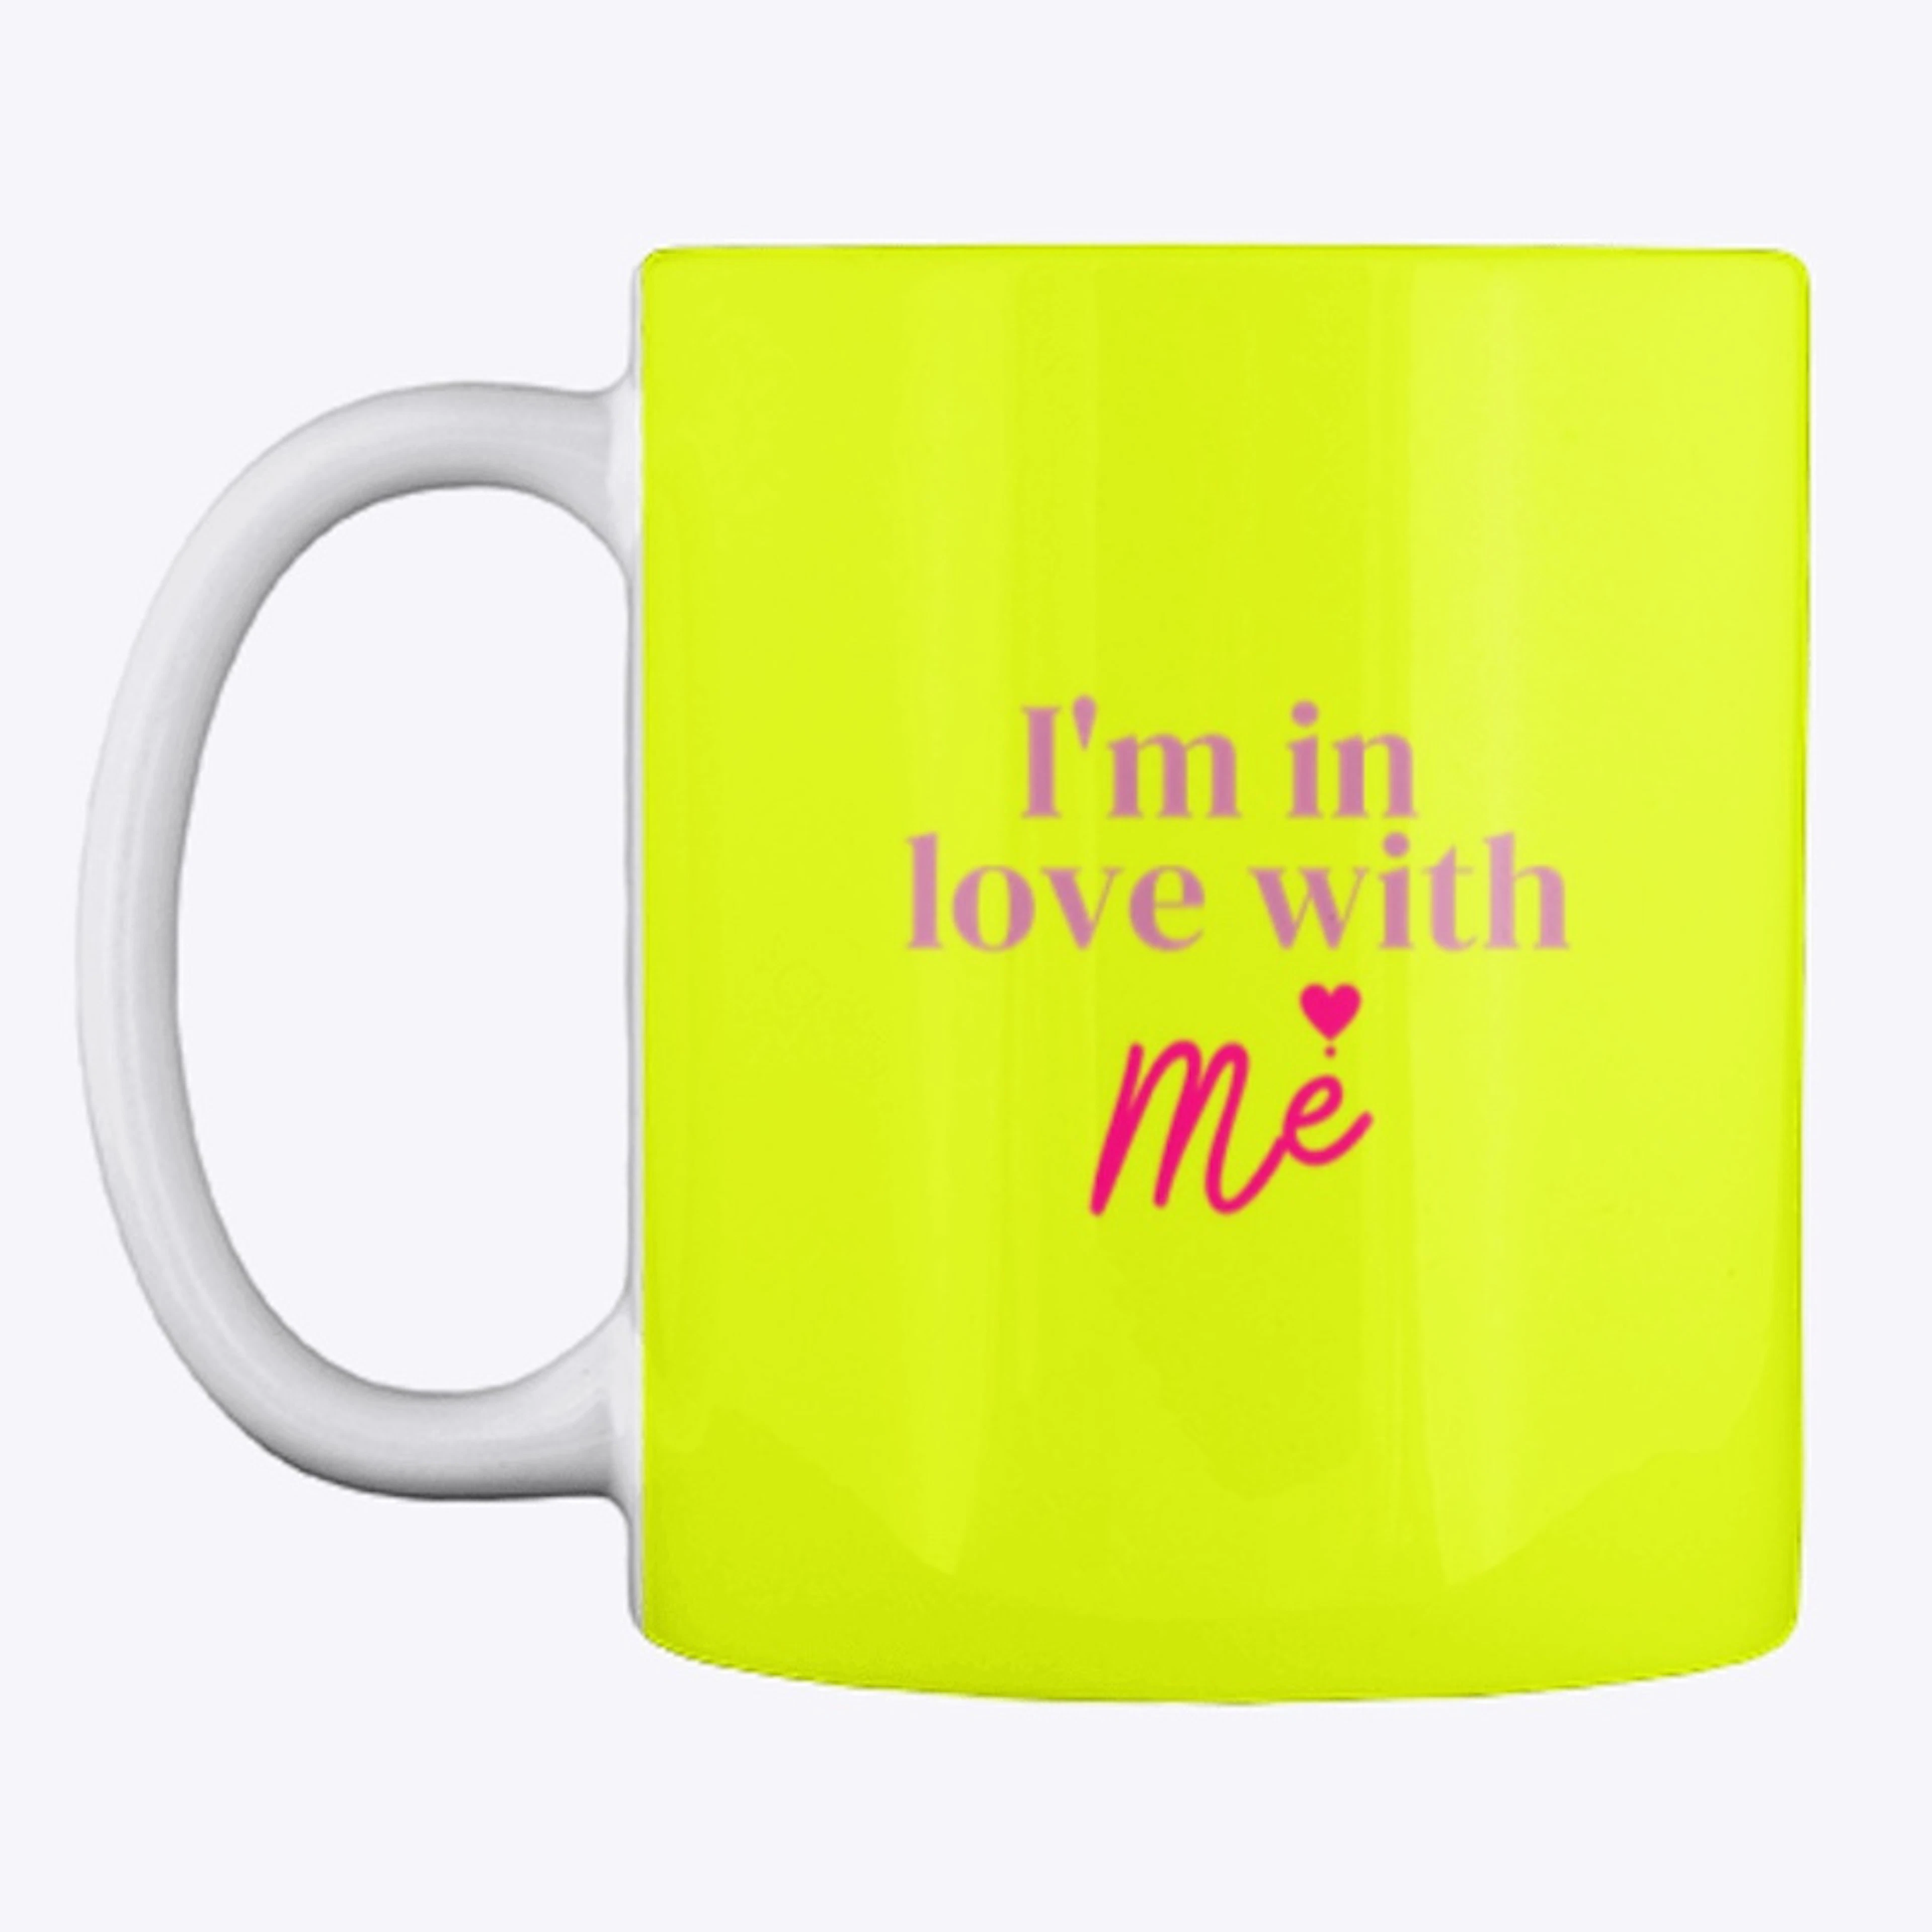 I'm in love with me Yellow- Mug